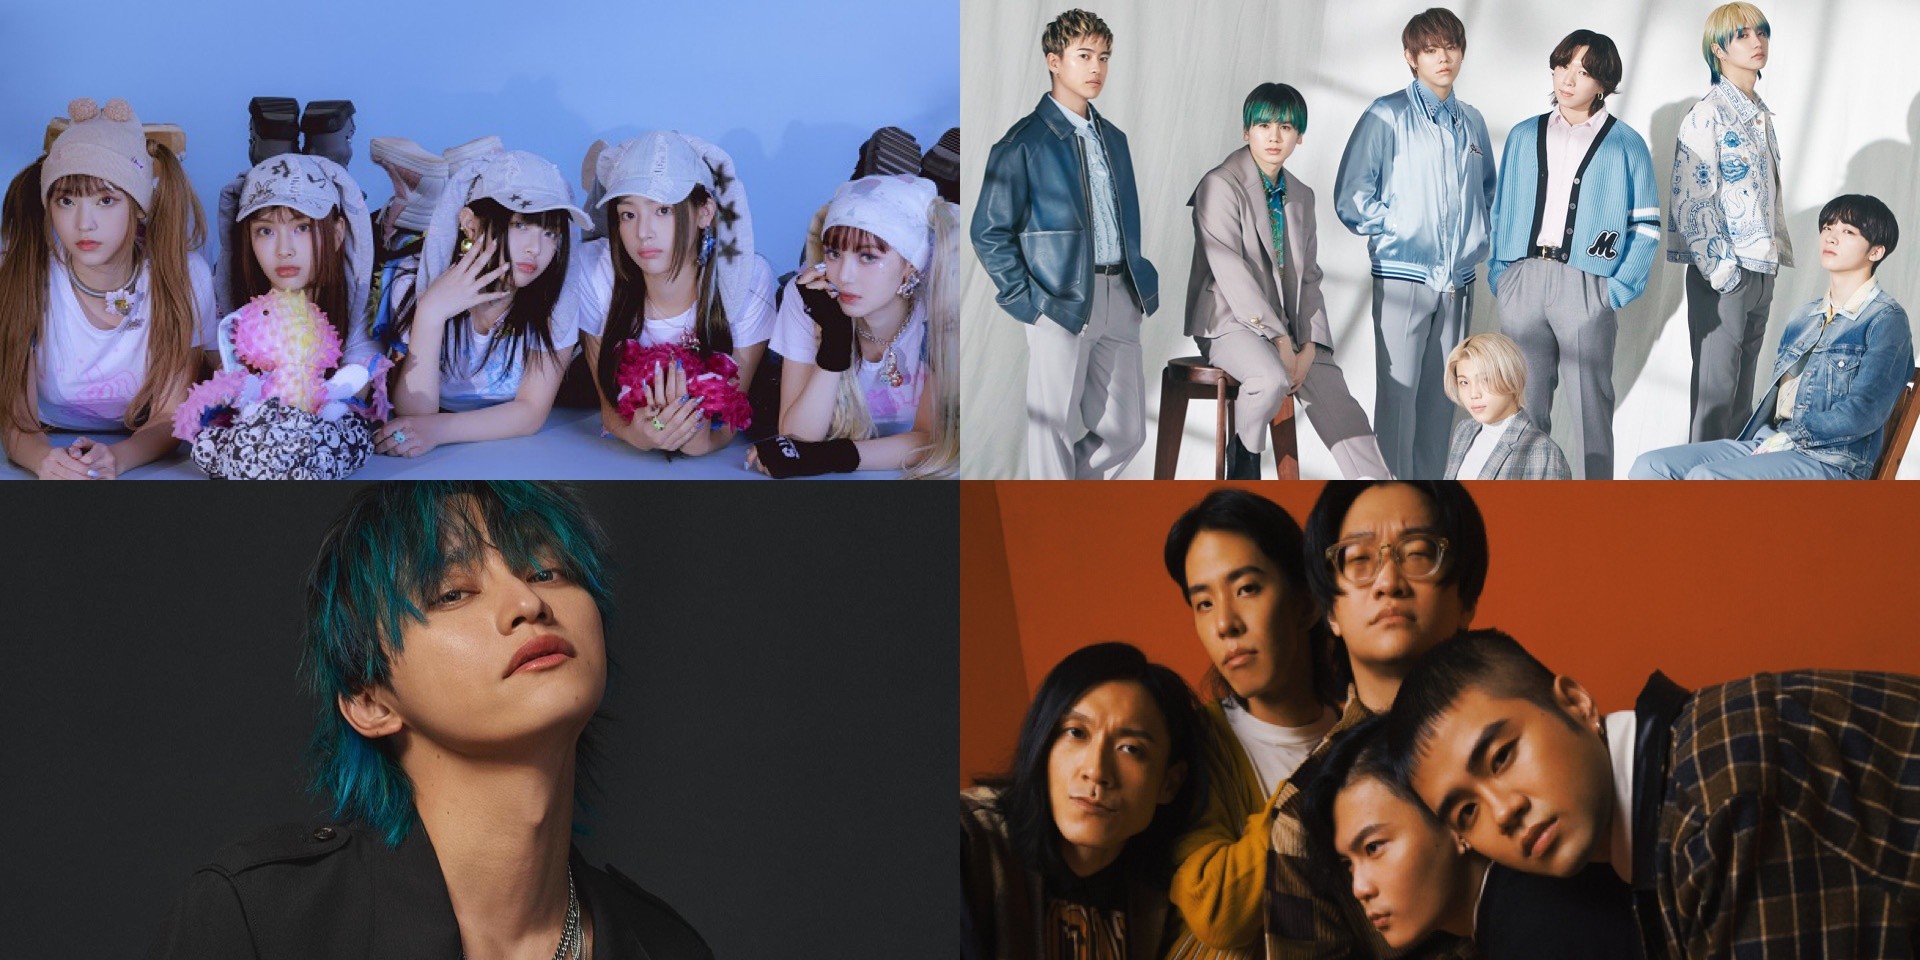 SUMMER SONIC 2023 adds more acts to lineup — NewJeans, BE:FIRST, SKY-HI, Sunset Rollercoaster, and more